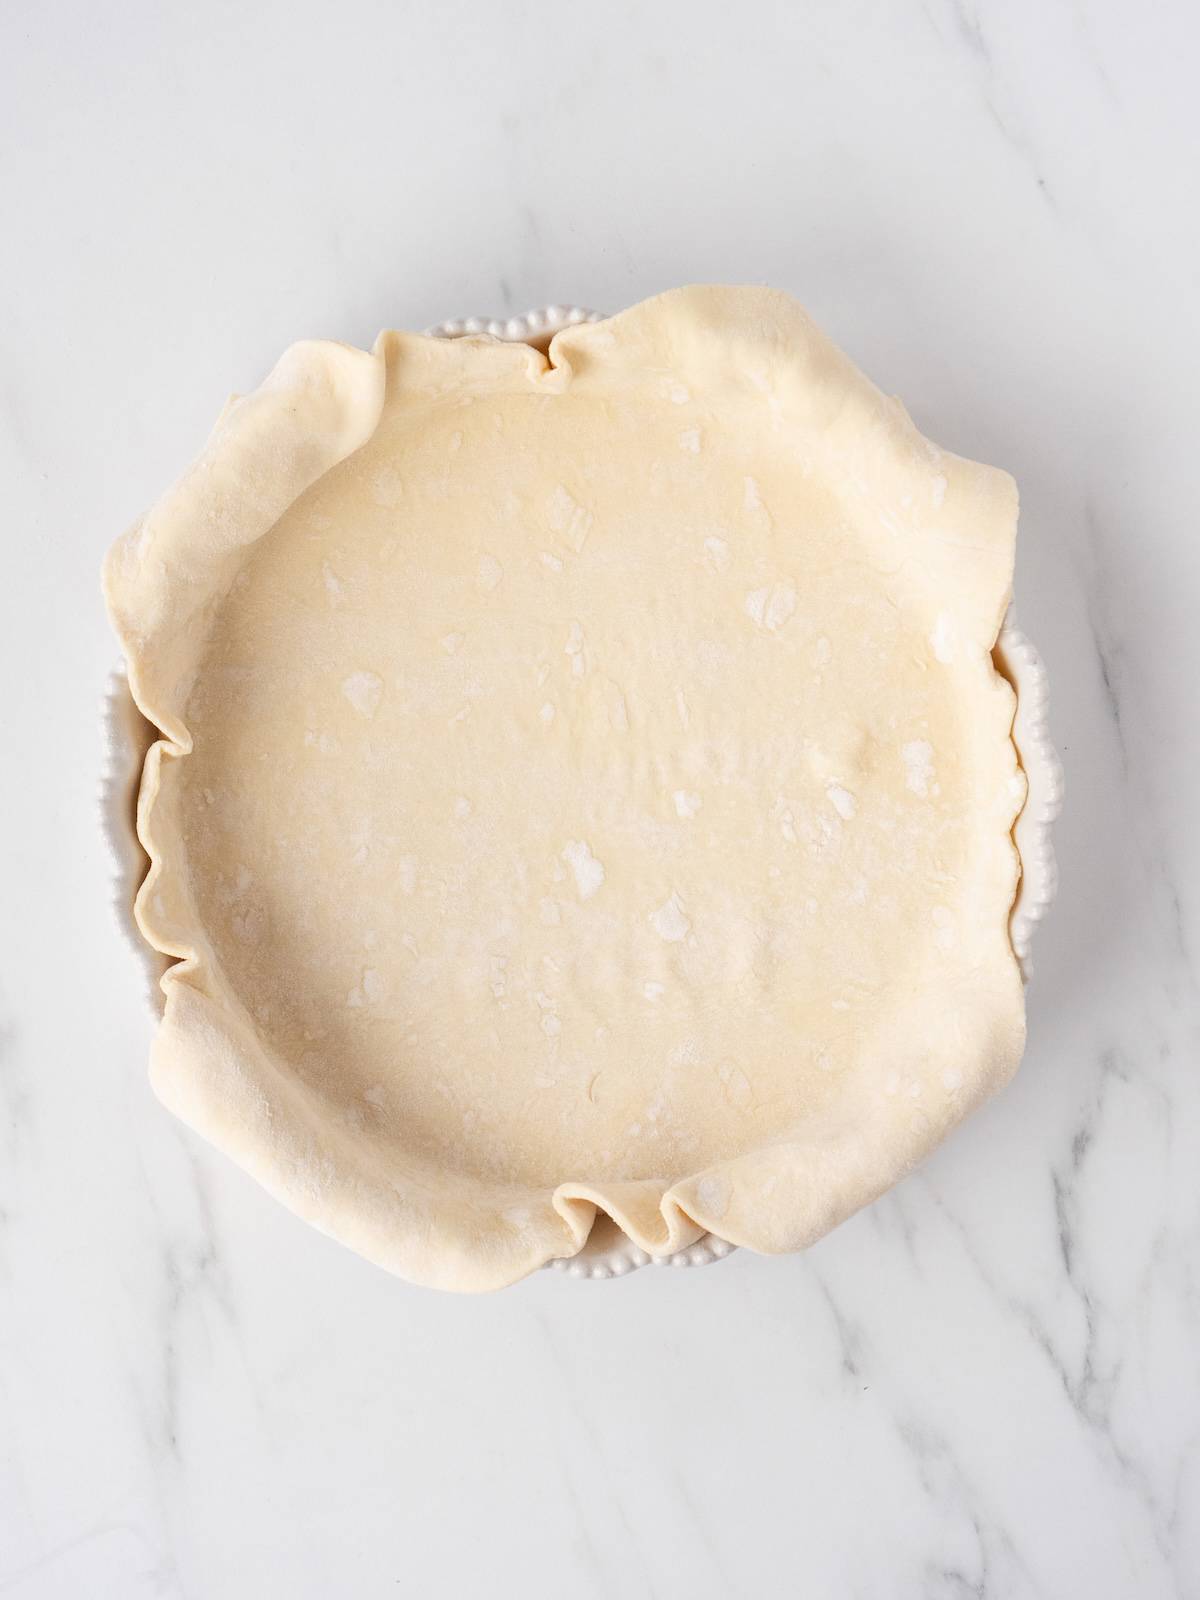 Puff pastry rolled out on a 9-inch pie dish and pressed down.